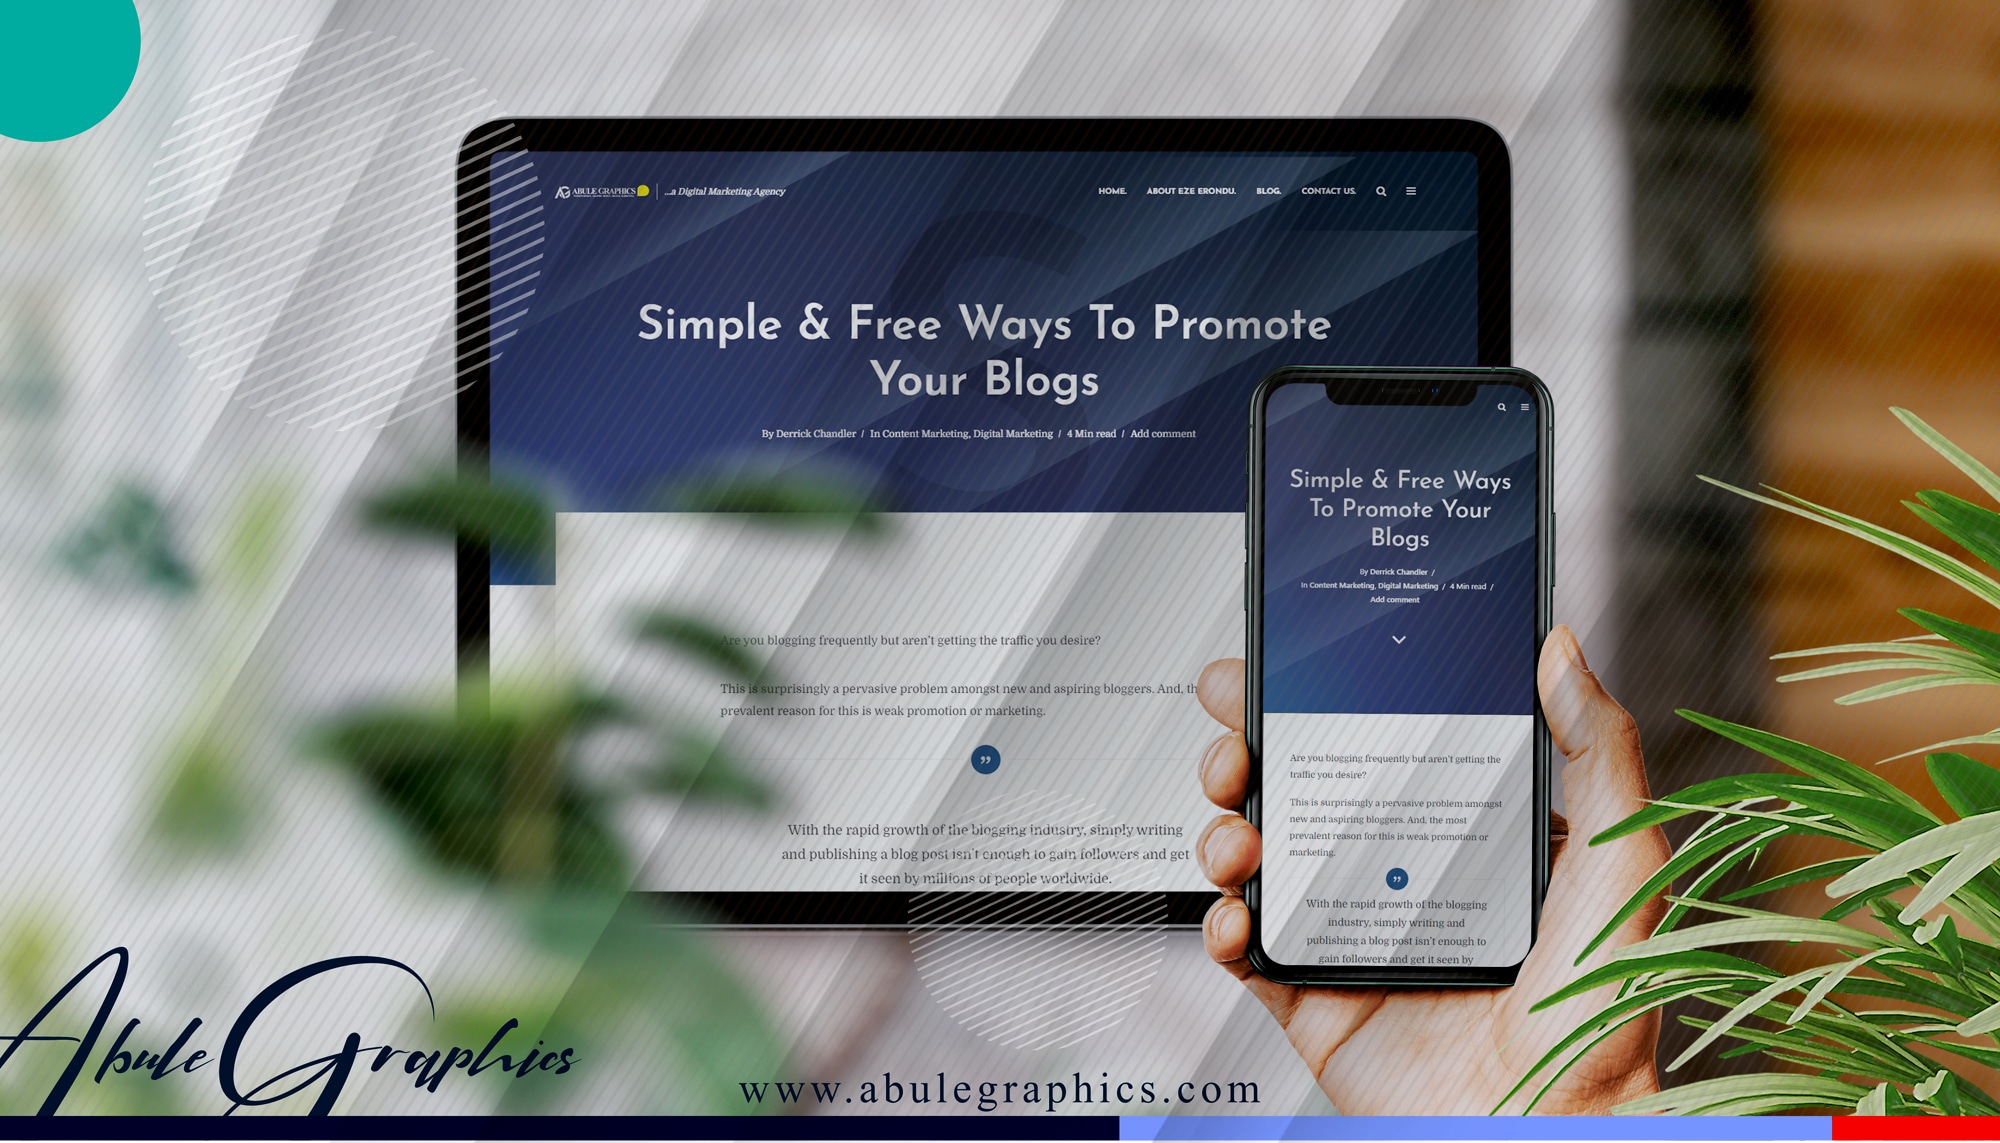 Simple & Free Ways To Promote Your Blogs